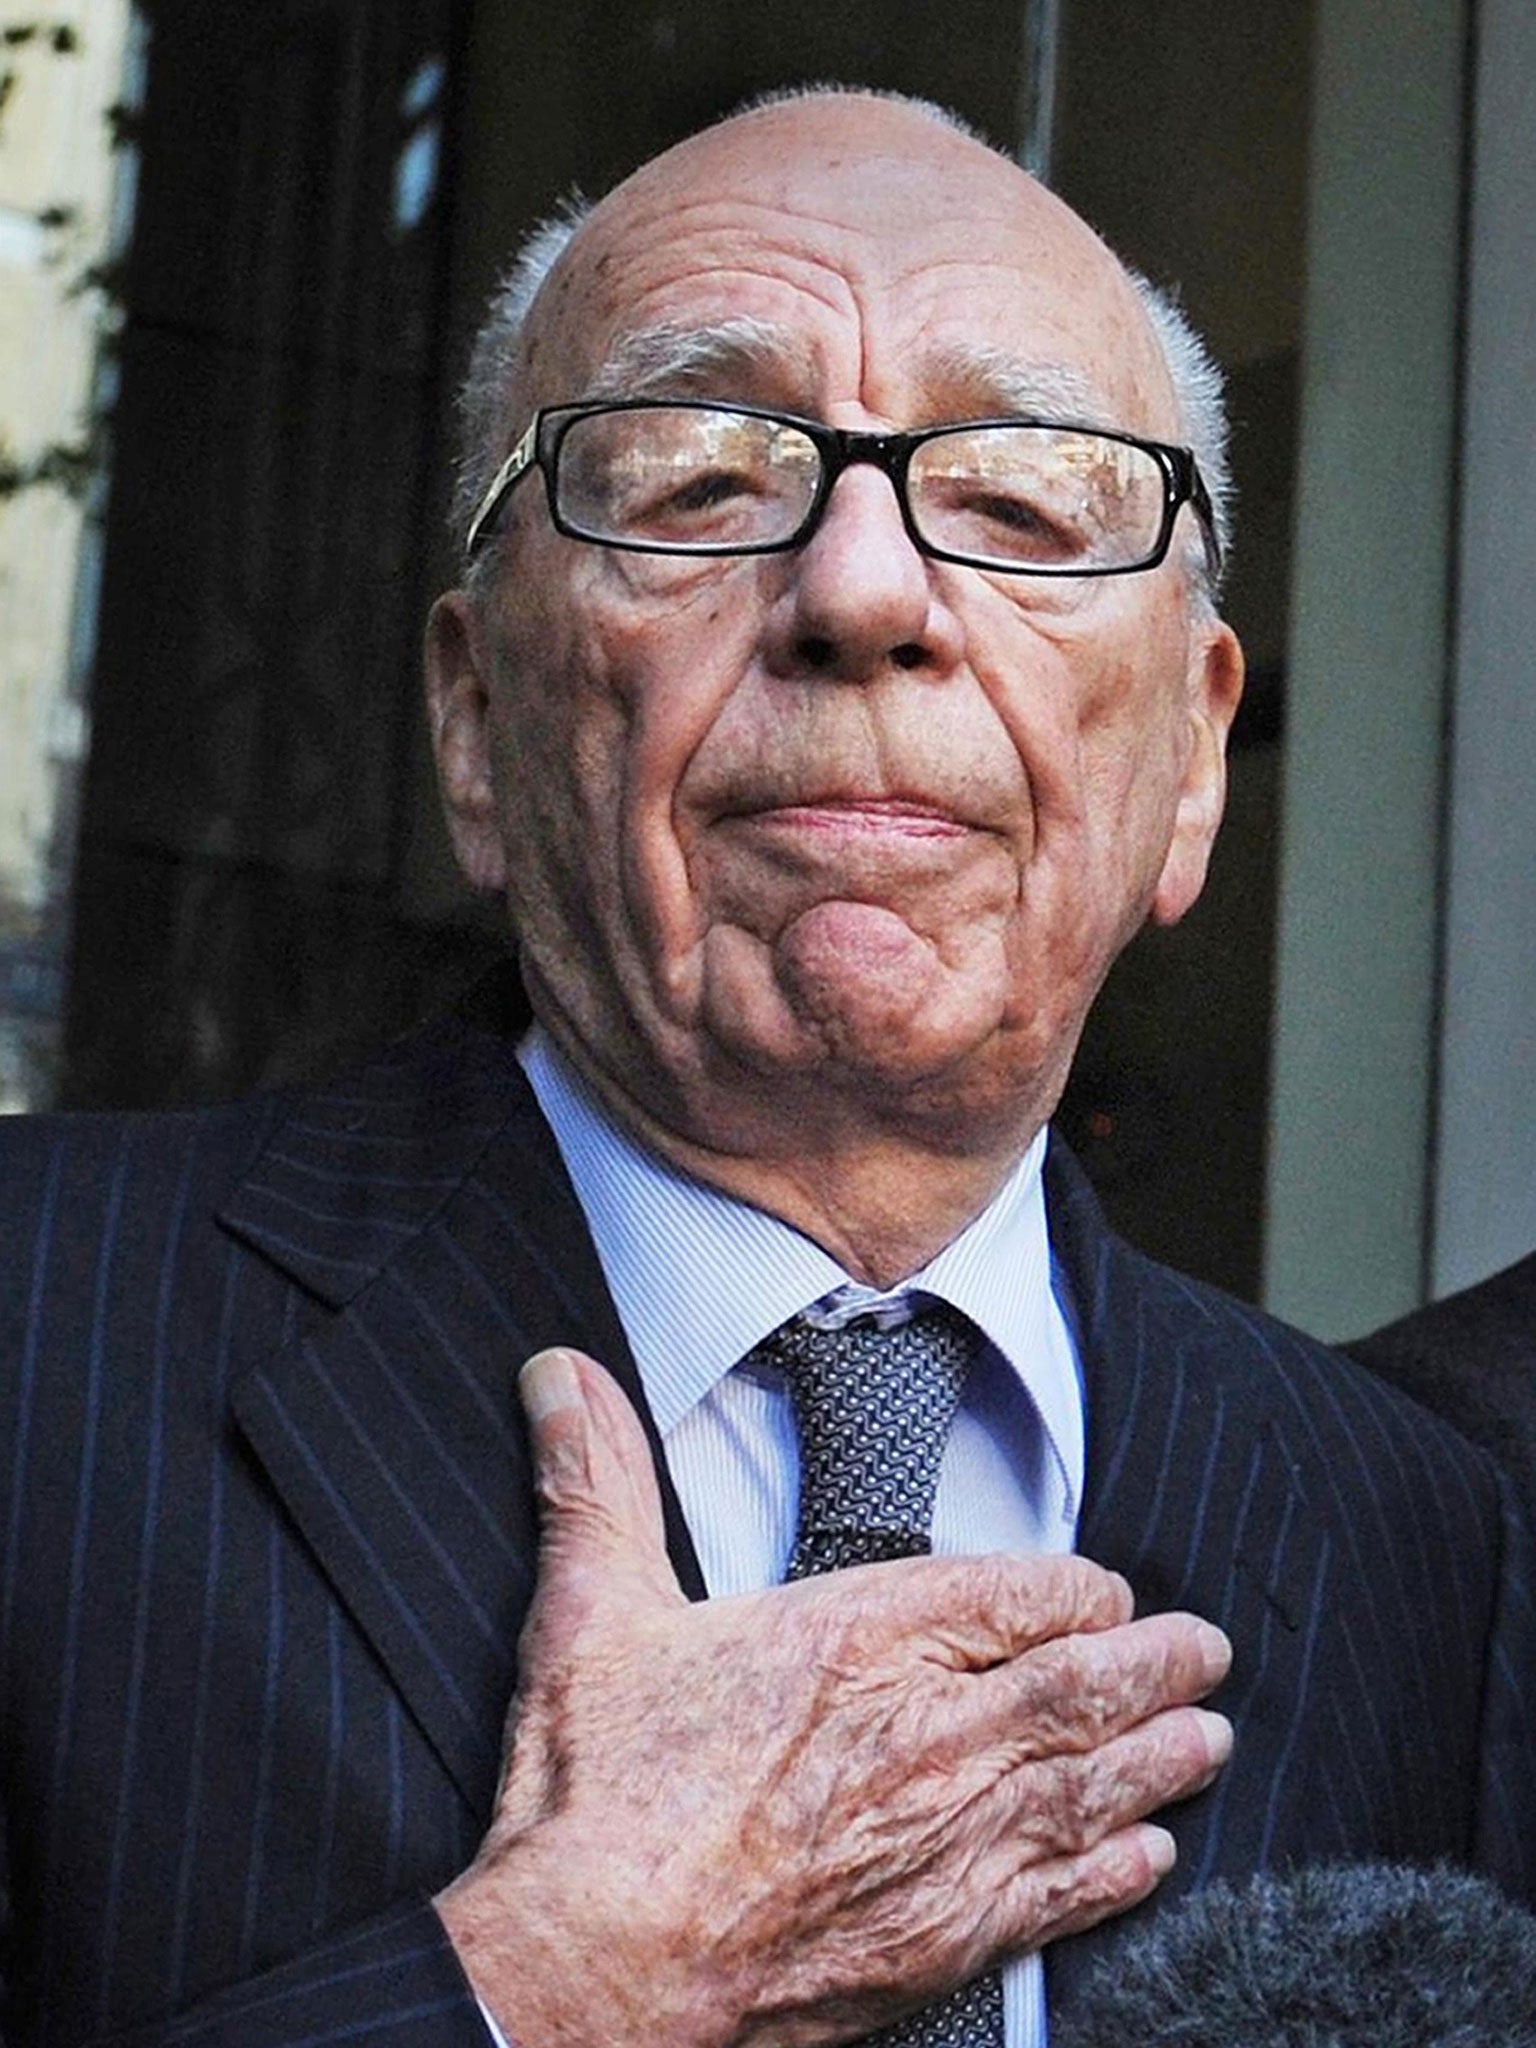 The media empire owned by Rupert Murdoch has been rocked by the scandal